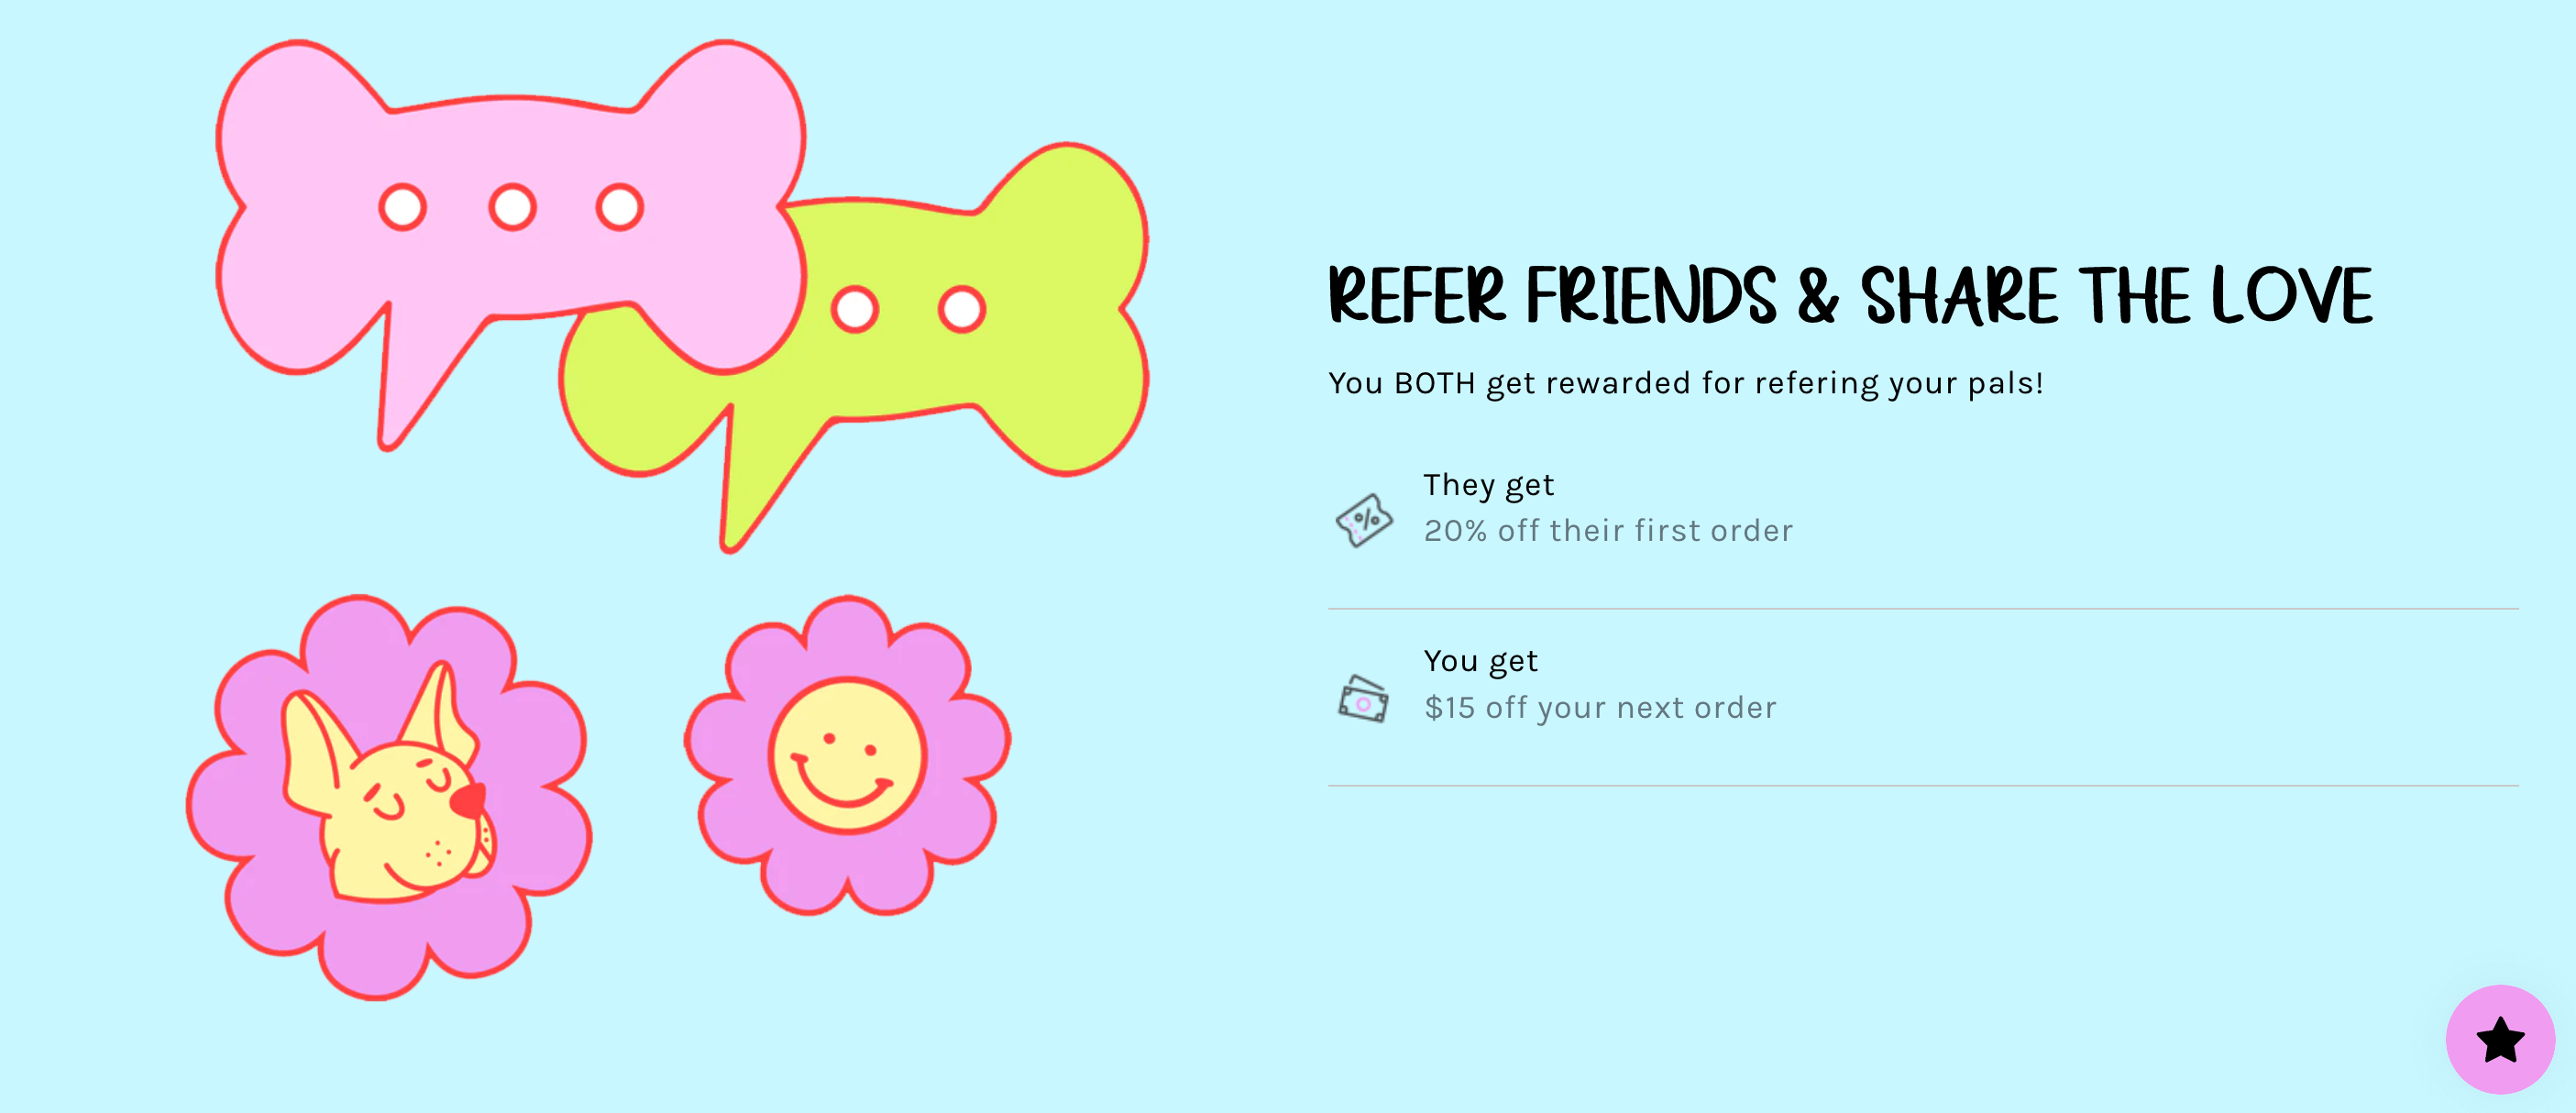 A screenshot of Woof and Wonder’s referral program explainer page on its website. The page is full of cartoon graphics of bones, flowers, and dogs all matching the overall brand style. The text next to the graphics is: Refer friends and share the love. You BOTH get rewarded for referring your pals! They get 20% off their first order. You get $15 off your next order. 